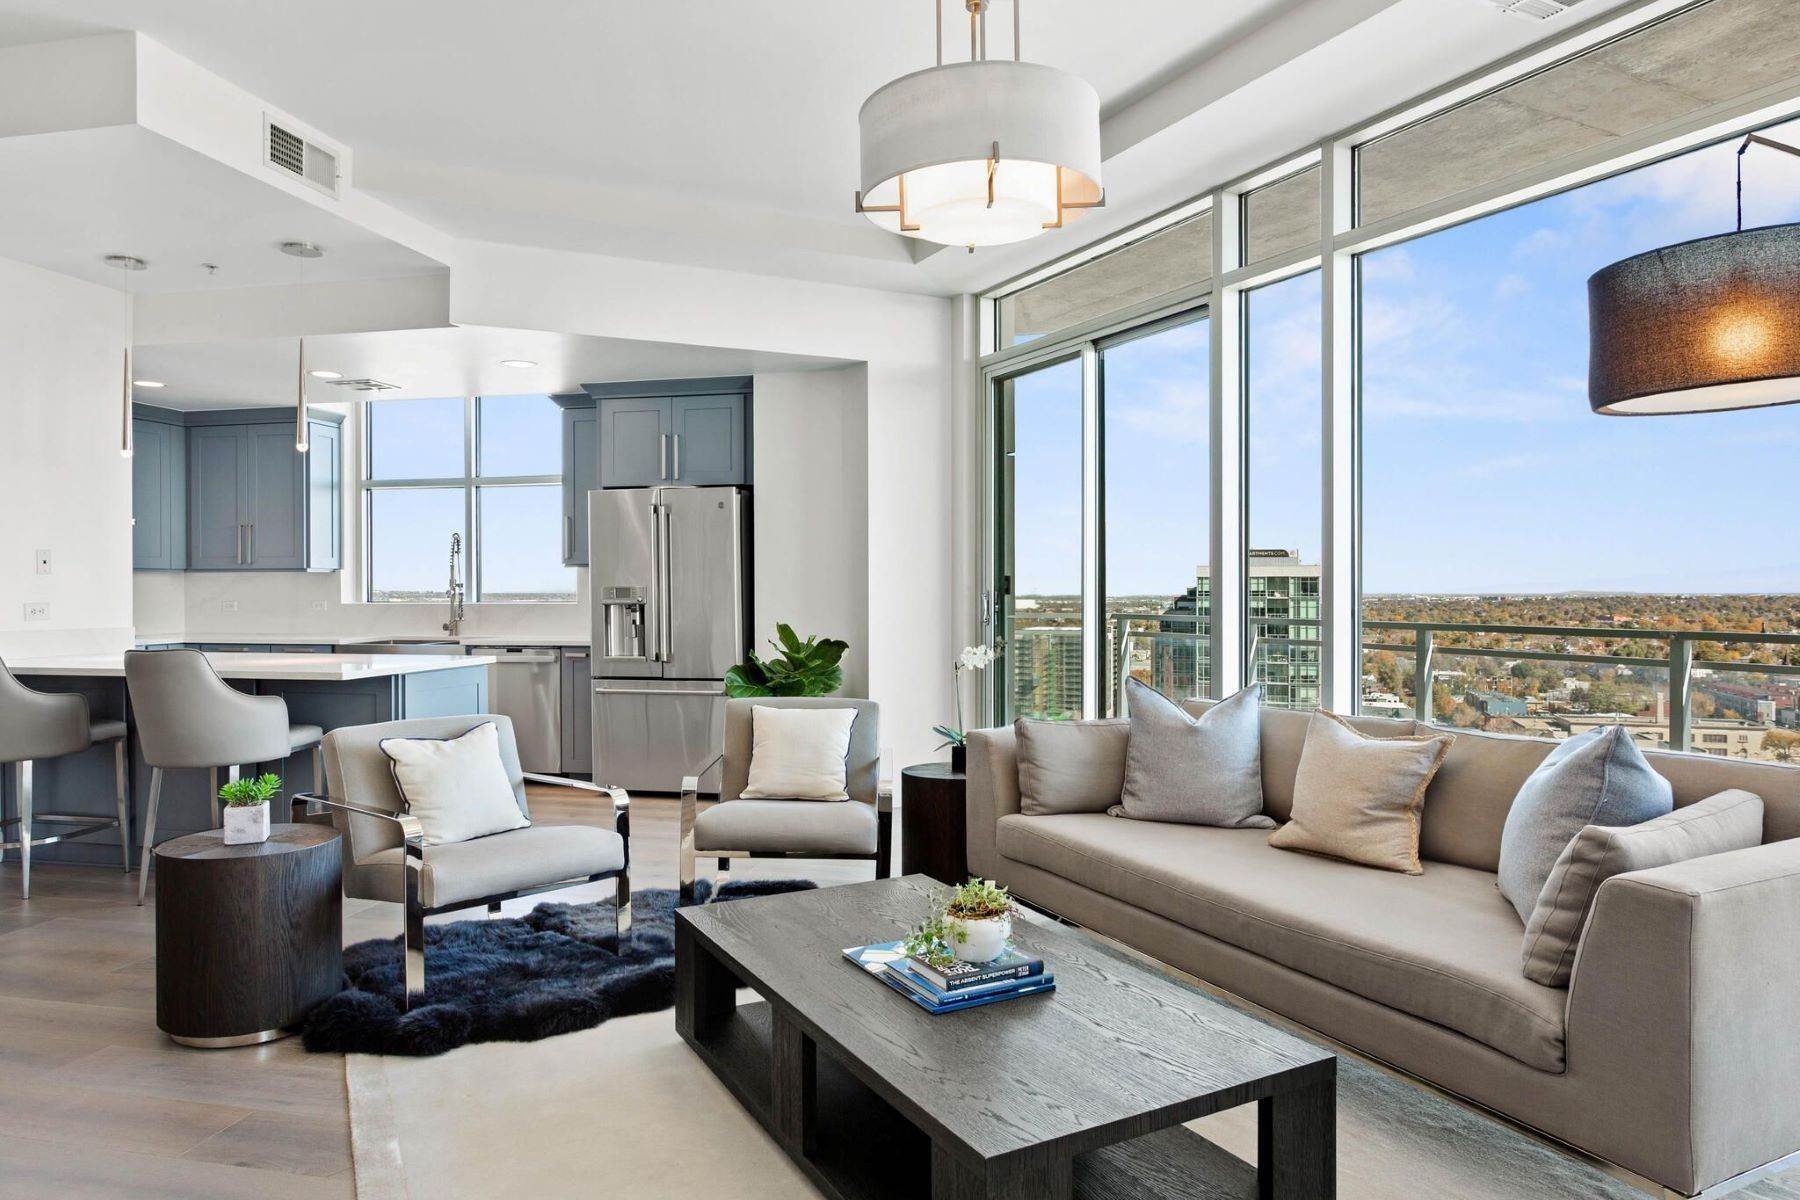 Condominiums at Fully renovated to PERFECTION - every inch of this 18th floor luxury residence h 2001 Lincoln Street, 1822 Denver, Colorado 80202 United States